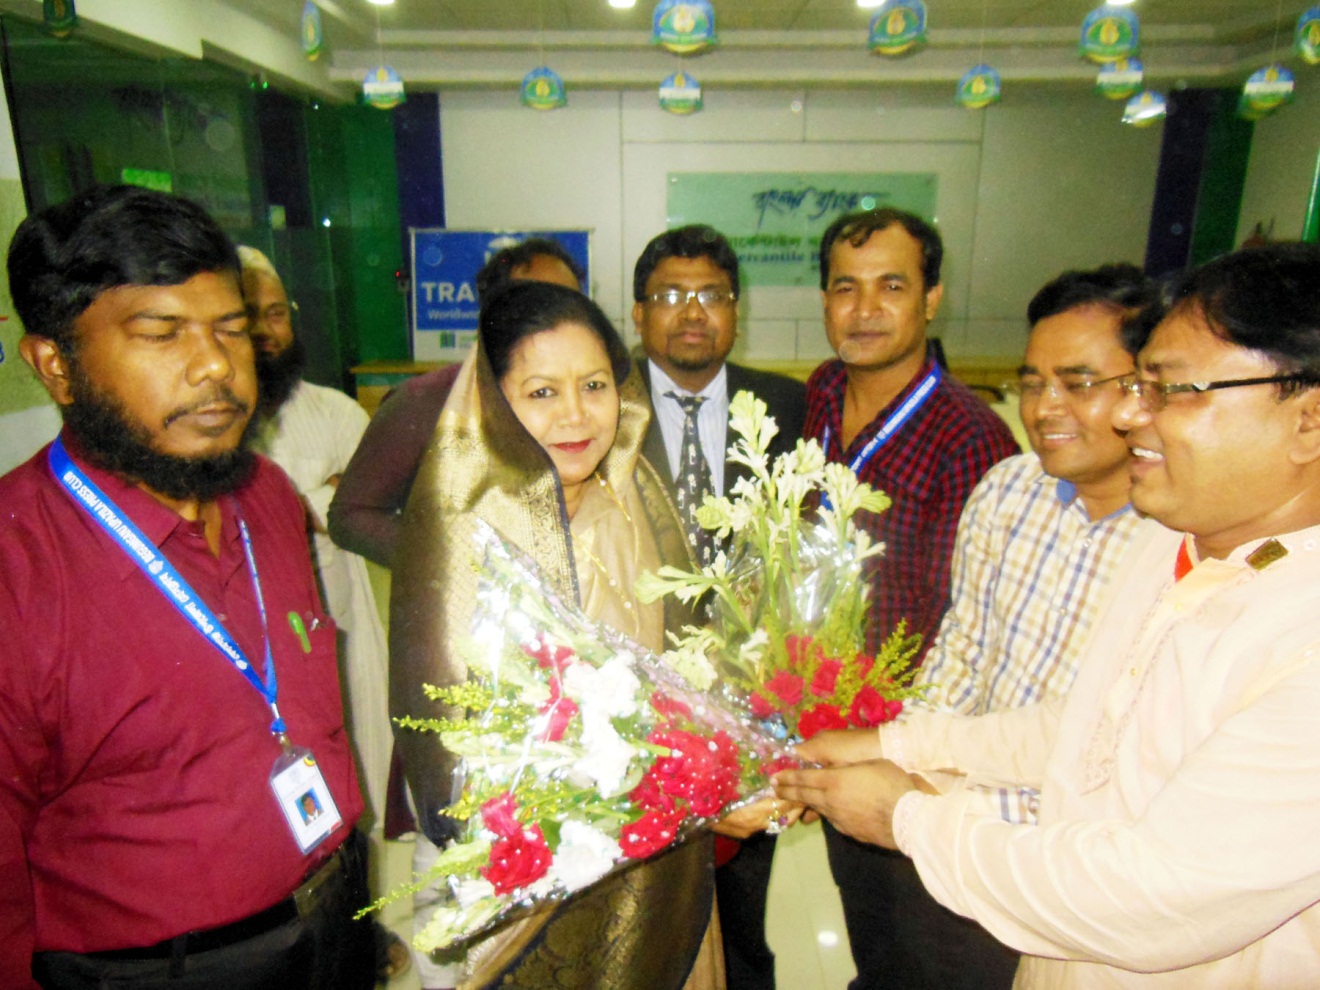 In the picture- Chairman of Begamganj-Sonaimuri Shikkha O Sastha Unnayan Foundation and Begumganj Technical and Computer Institute Principal Gias Uddin Mithu exchanges floral greetings with RTV Director Kamrun Nahar.